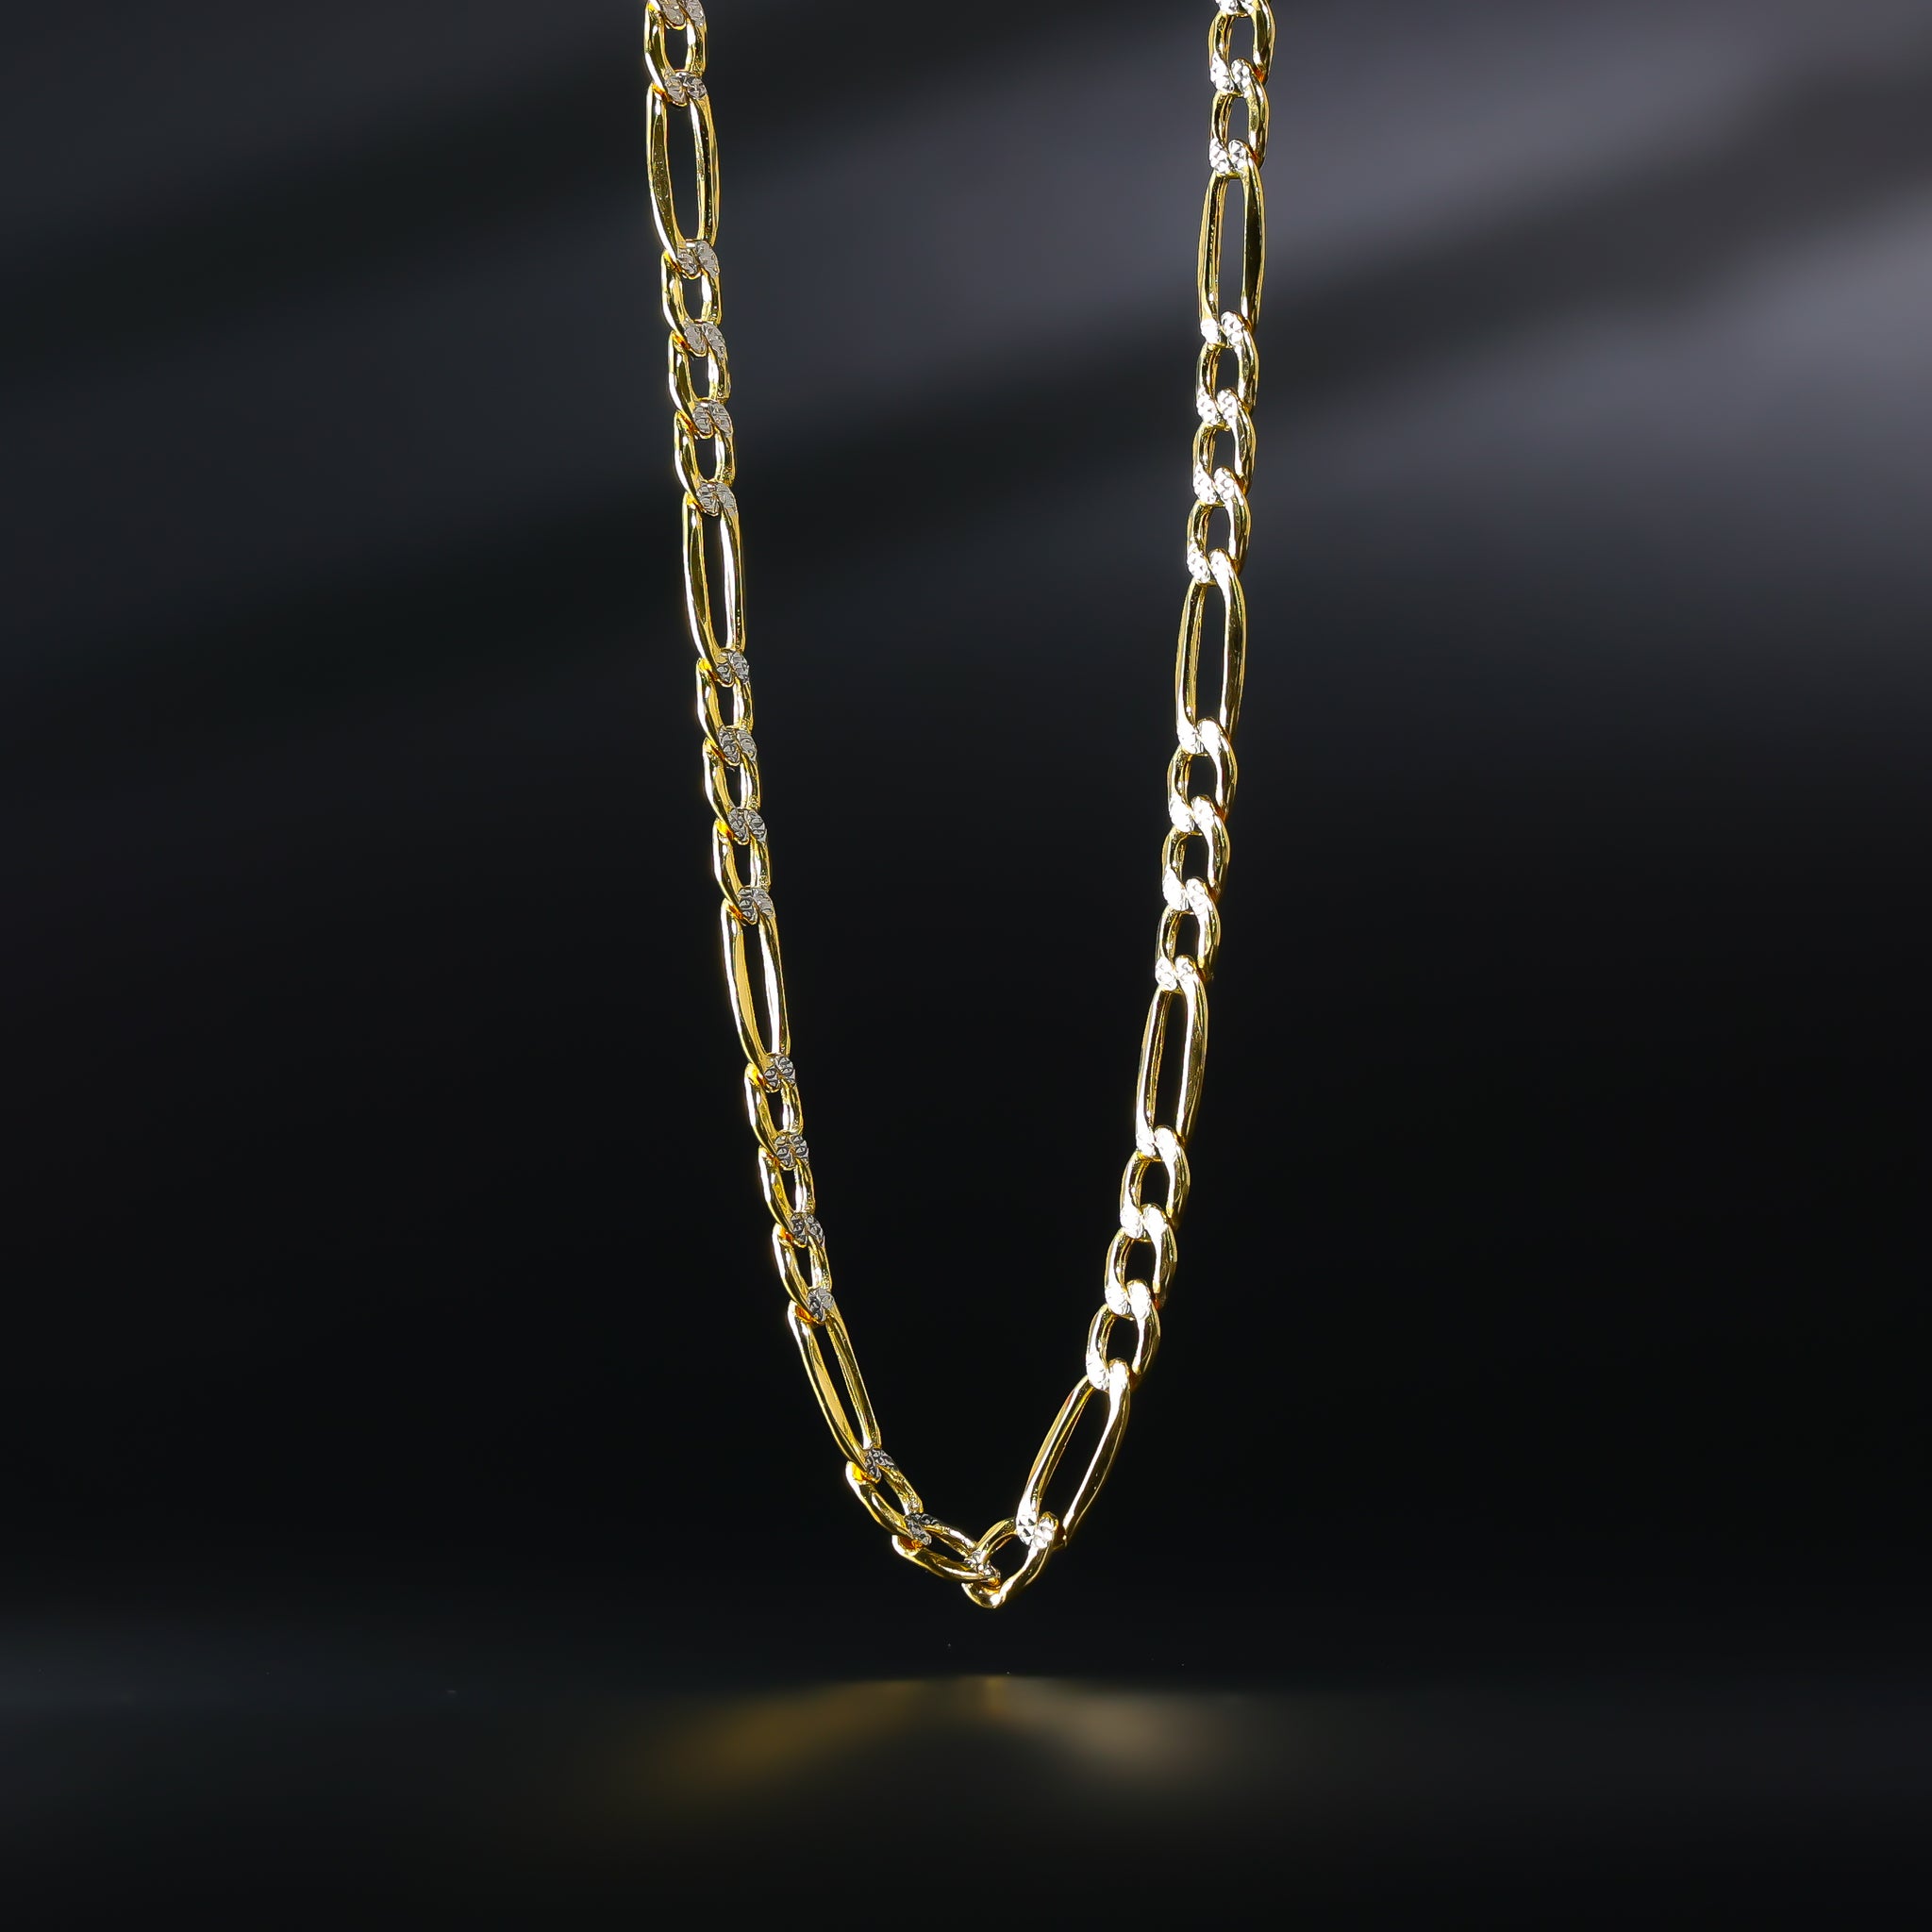 Gold 6.5mm Hollow Figaro Chain Model-0411 - Charlie & Co. Jewelry